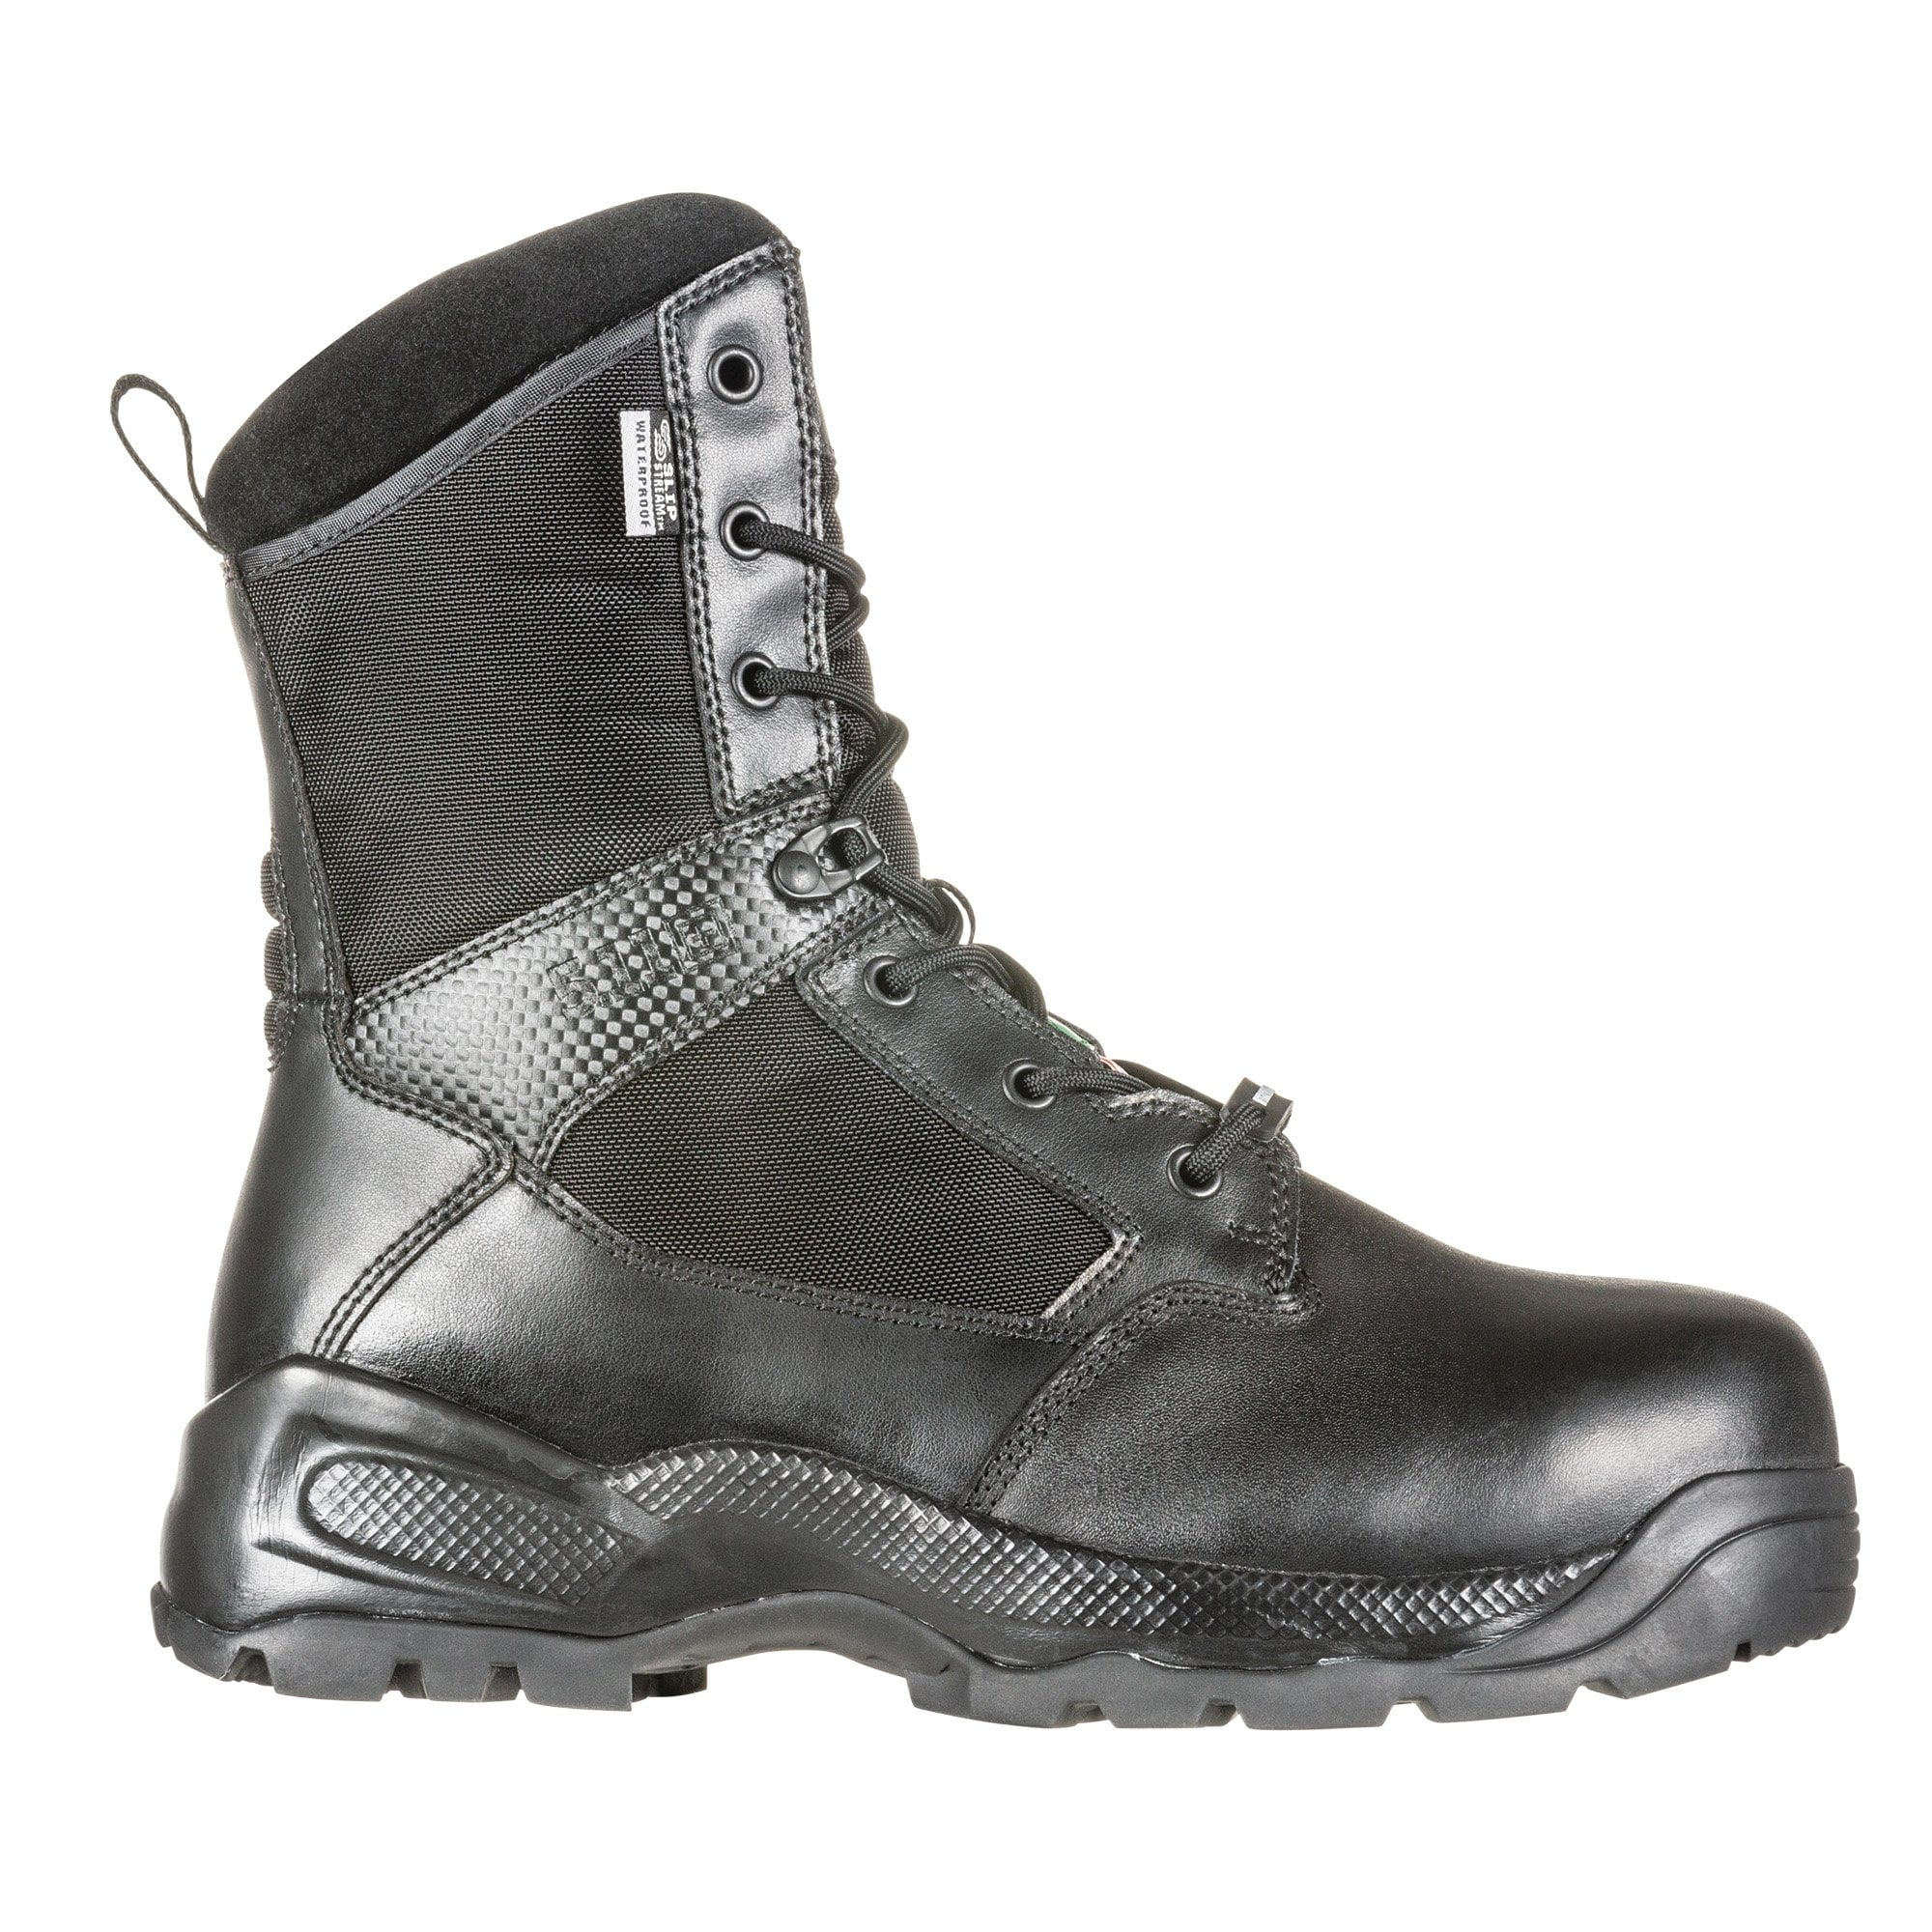 5.11 Tactical Mens ATAC 2.0 8-Inch Shield Military Boots Style 12416 Black